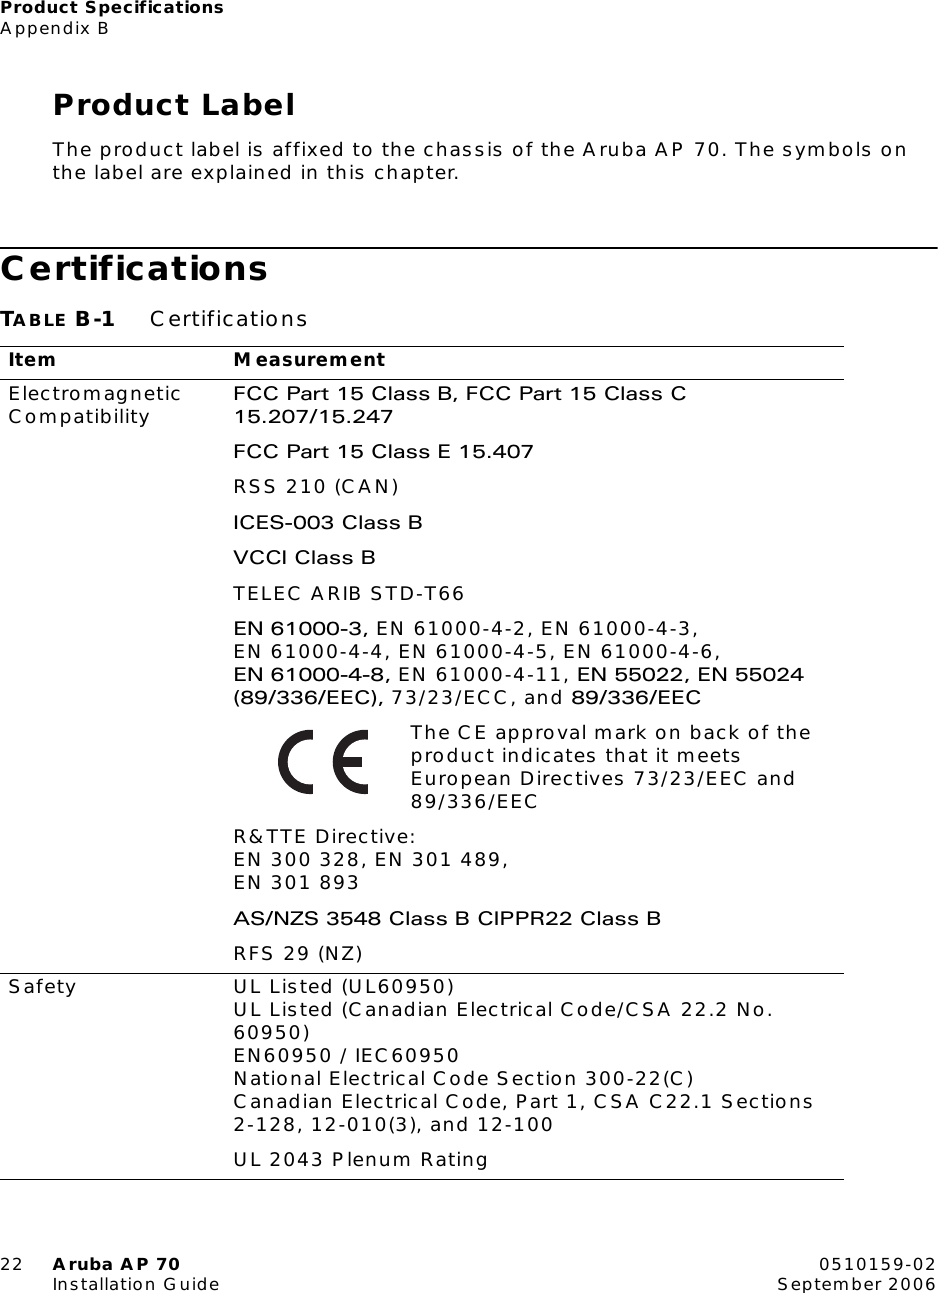 Product SpecificationsAppendix B22 Aruba AP 70 0510159-02Installation Guide September 2006Product LabelThe product label is affixed to the chassis of the Aruba AP 70. The symbols on the label are explained in this chapter.CertificationsTABLE B-1 CertificationsItem MeasurementElectromagneticCompatibility FCC Part 15 Class B, FCC Part 15 Class C 15.207/15.247FCC Part 15 Class E 15.407RSS 210 (CAN)ICES-003 Class BVCCI Class BTELEC ARIB STD-T66EN 61000-3, EN 61000-4-2, EN 61000-4-3, EN 61000-4-4, EN 61000-4-5, EN 61000-4-6, EN 61000-4-8, EN 61000-4-11, EN 55022, EN 55024 (89/336/EEC), 73/23/ECC, and 89/336/EECThe CE approval mark on back of the product indicates that it meets European Directives 73/23/EEC and 89/336/EECR&amp;TTE Directive:EN 300 328, EN 301 489,EN 301 893AS/NZS 3548 Class B CIPPR22 Class BRFS 29 (NZ)Safety UL Listed (UL60950)UL Listed (Canadian Electrical Code/CSA 22.2 No. 60950)EN60950 / IEC60950National Electrical Code Section 300-22(C)Canadian Electrical Code, Part 1, CSA C22.1 Sections 2-128, 12-010(3), and 12-100UL 2043 Plenum Rating